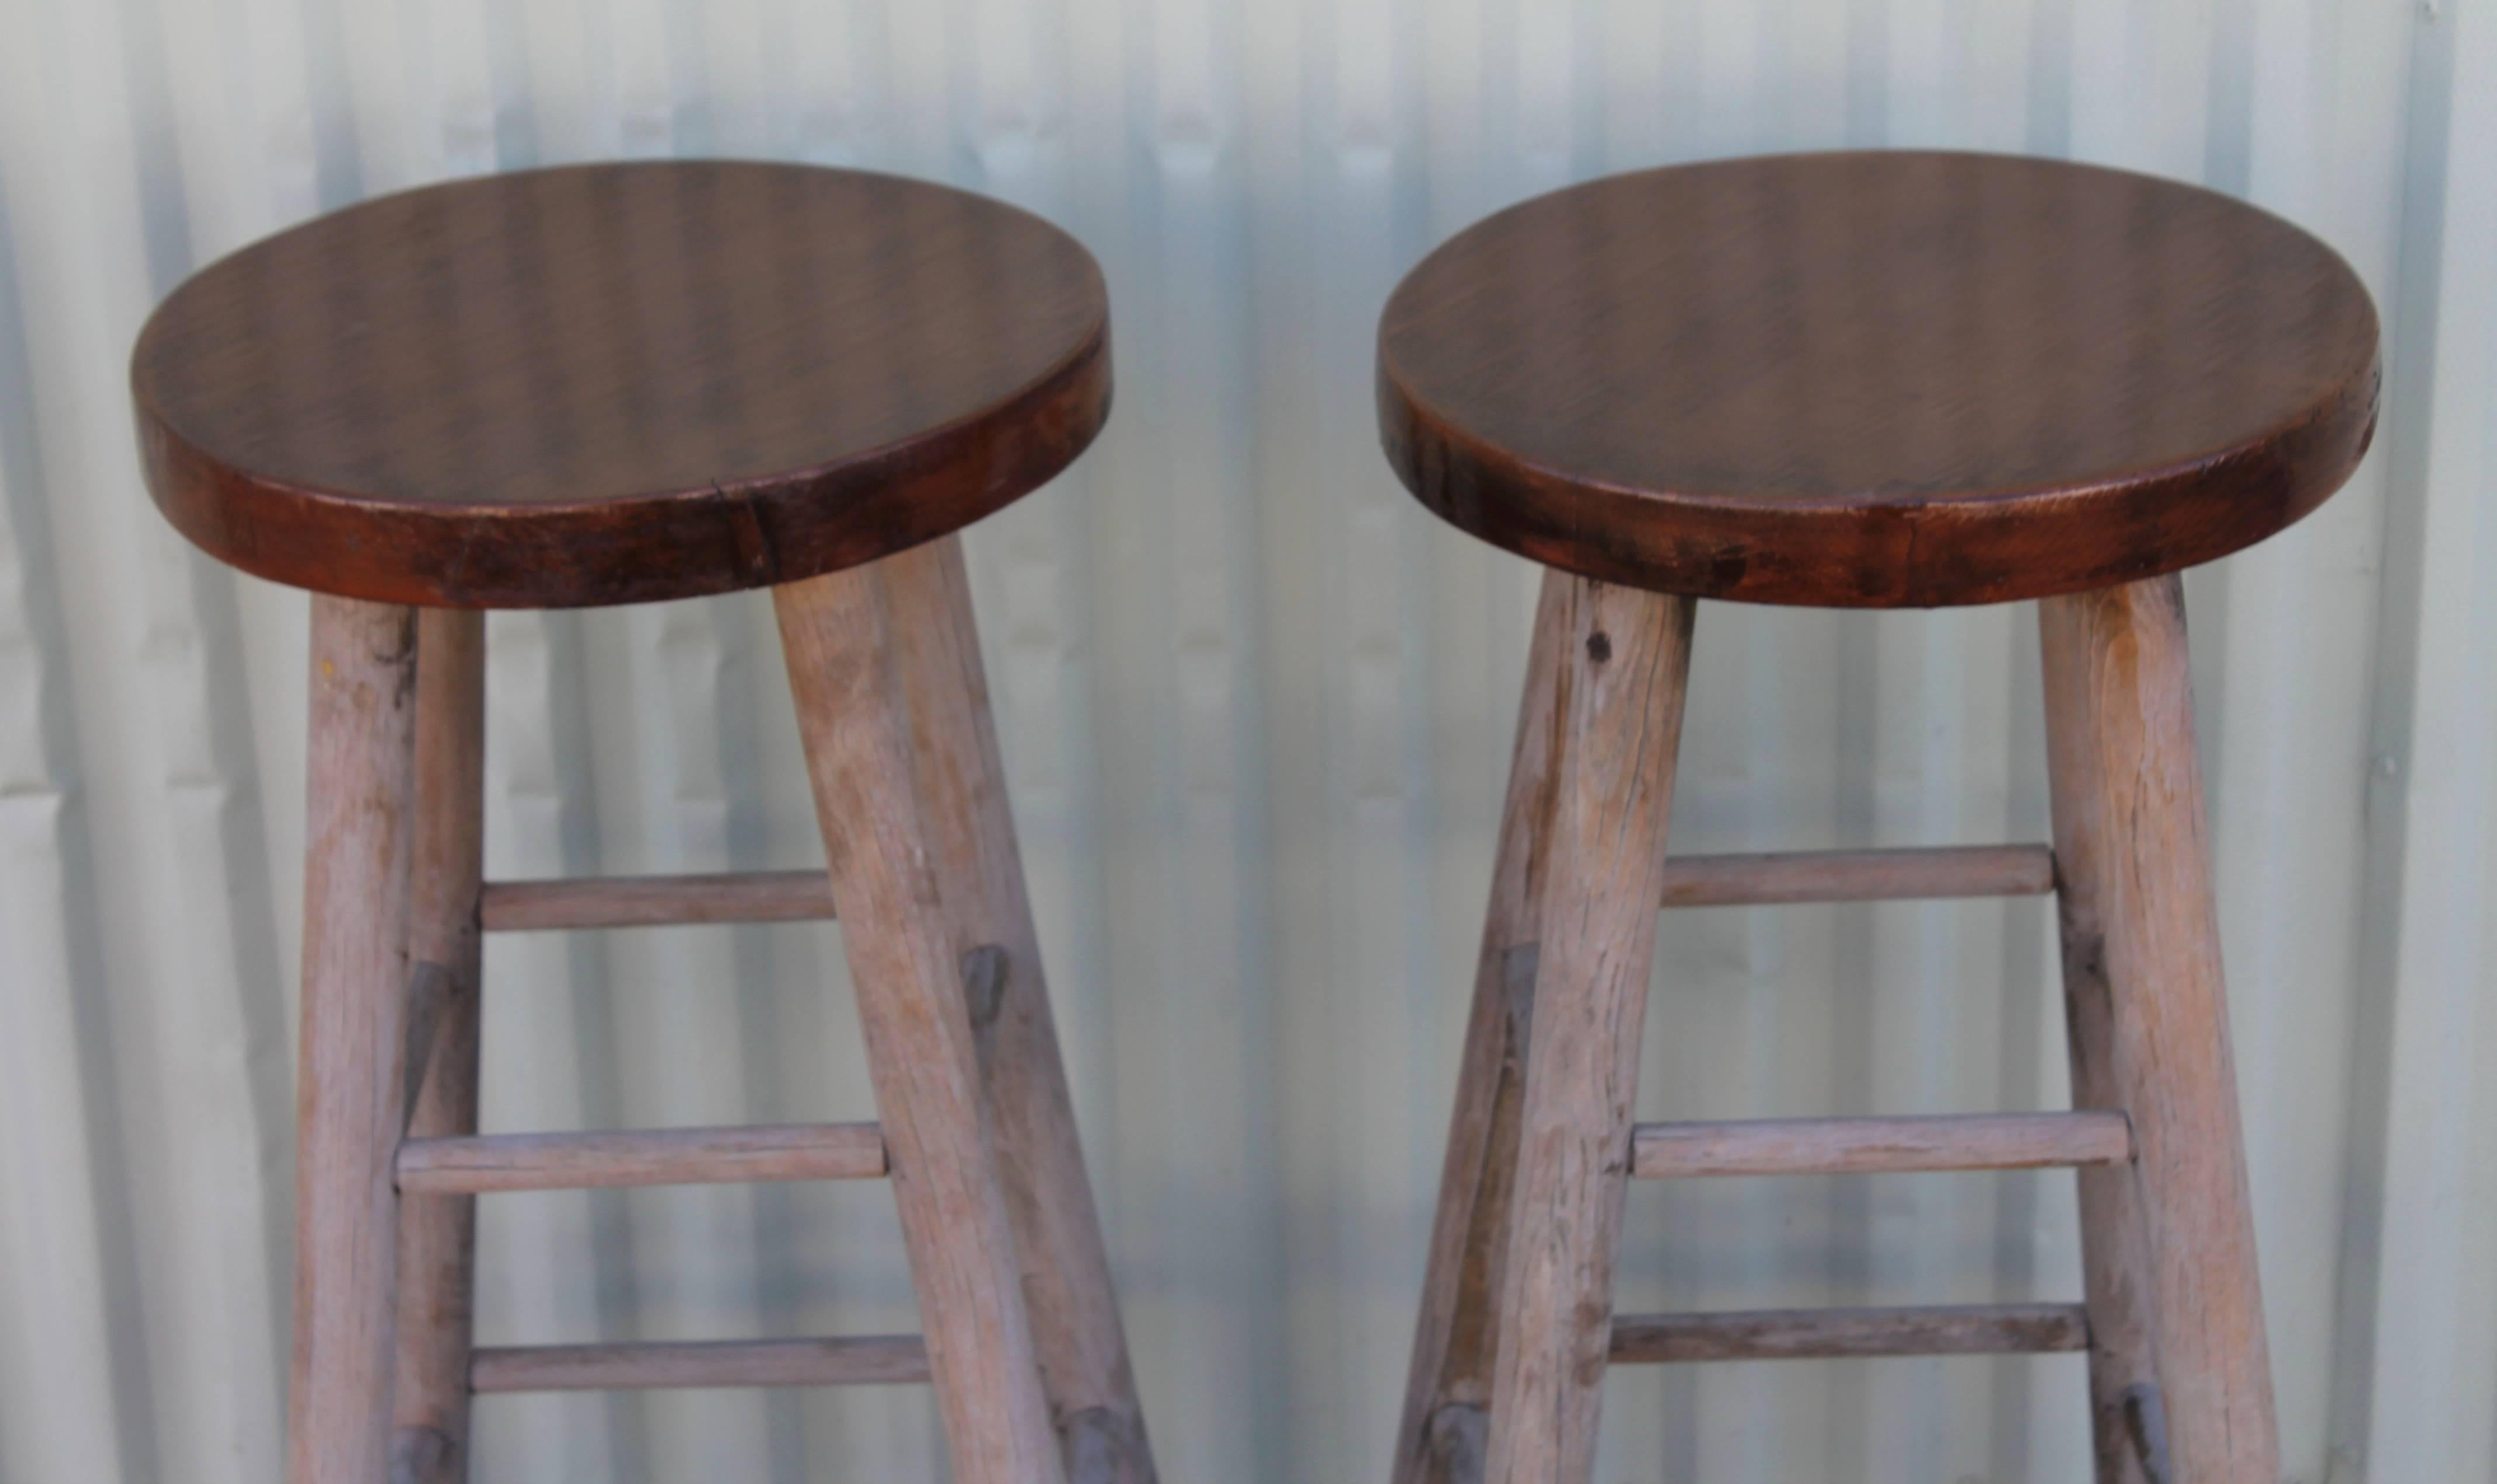 Pair of plank top and very distressed painted bar stools. They are sturdy and in good condition.